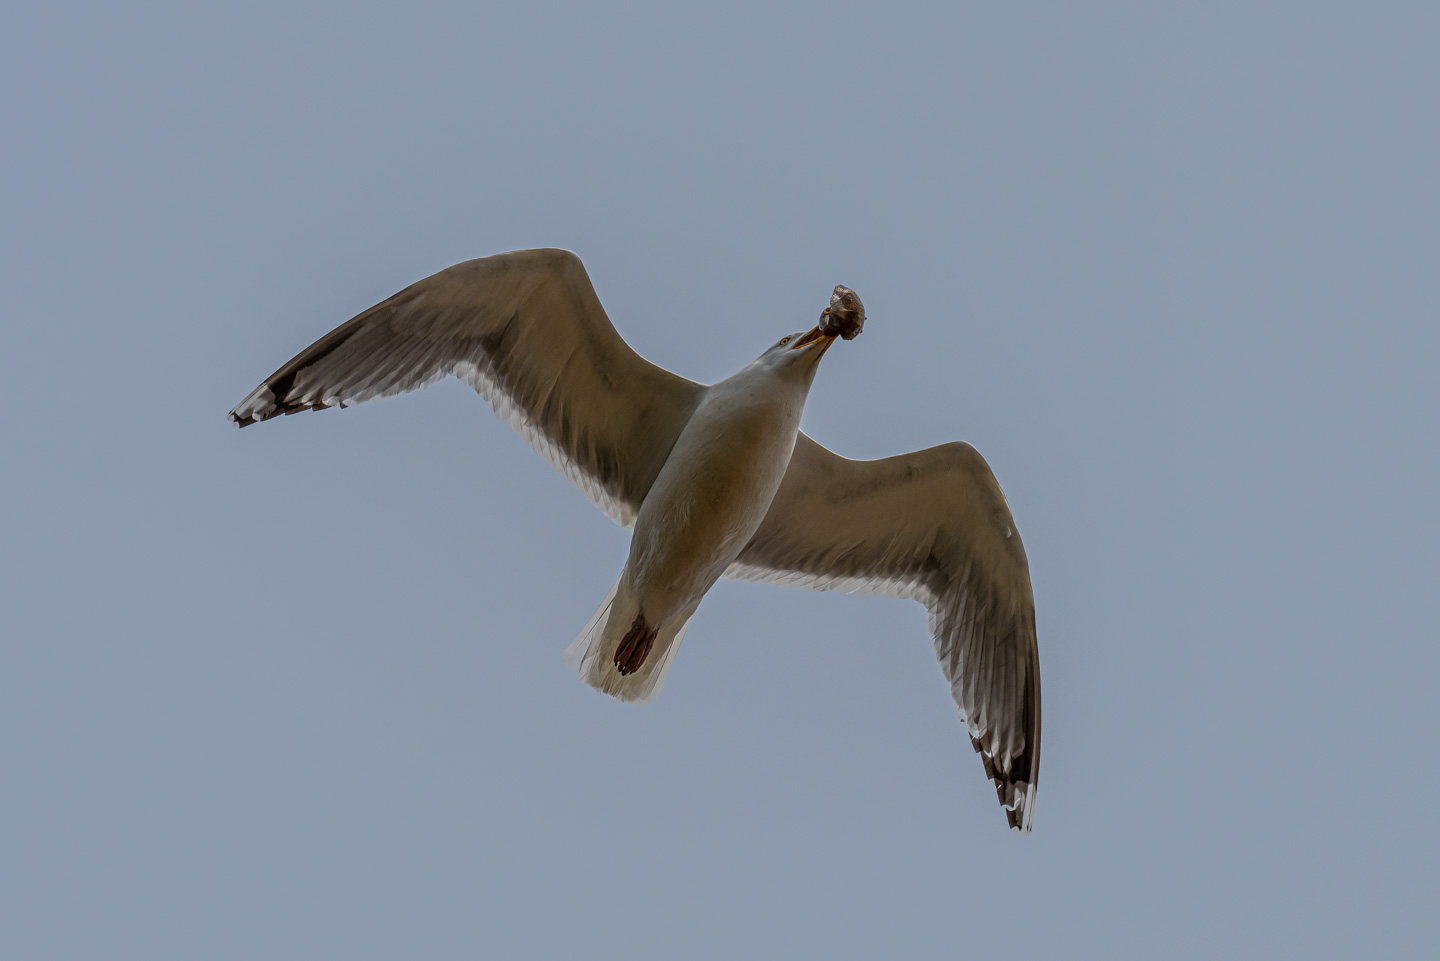 Gull in flight, carrying a shell